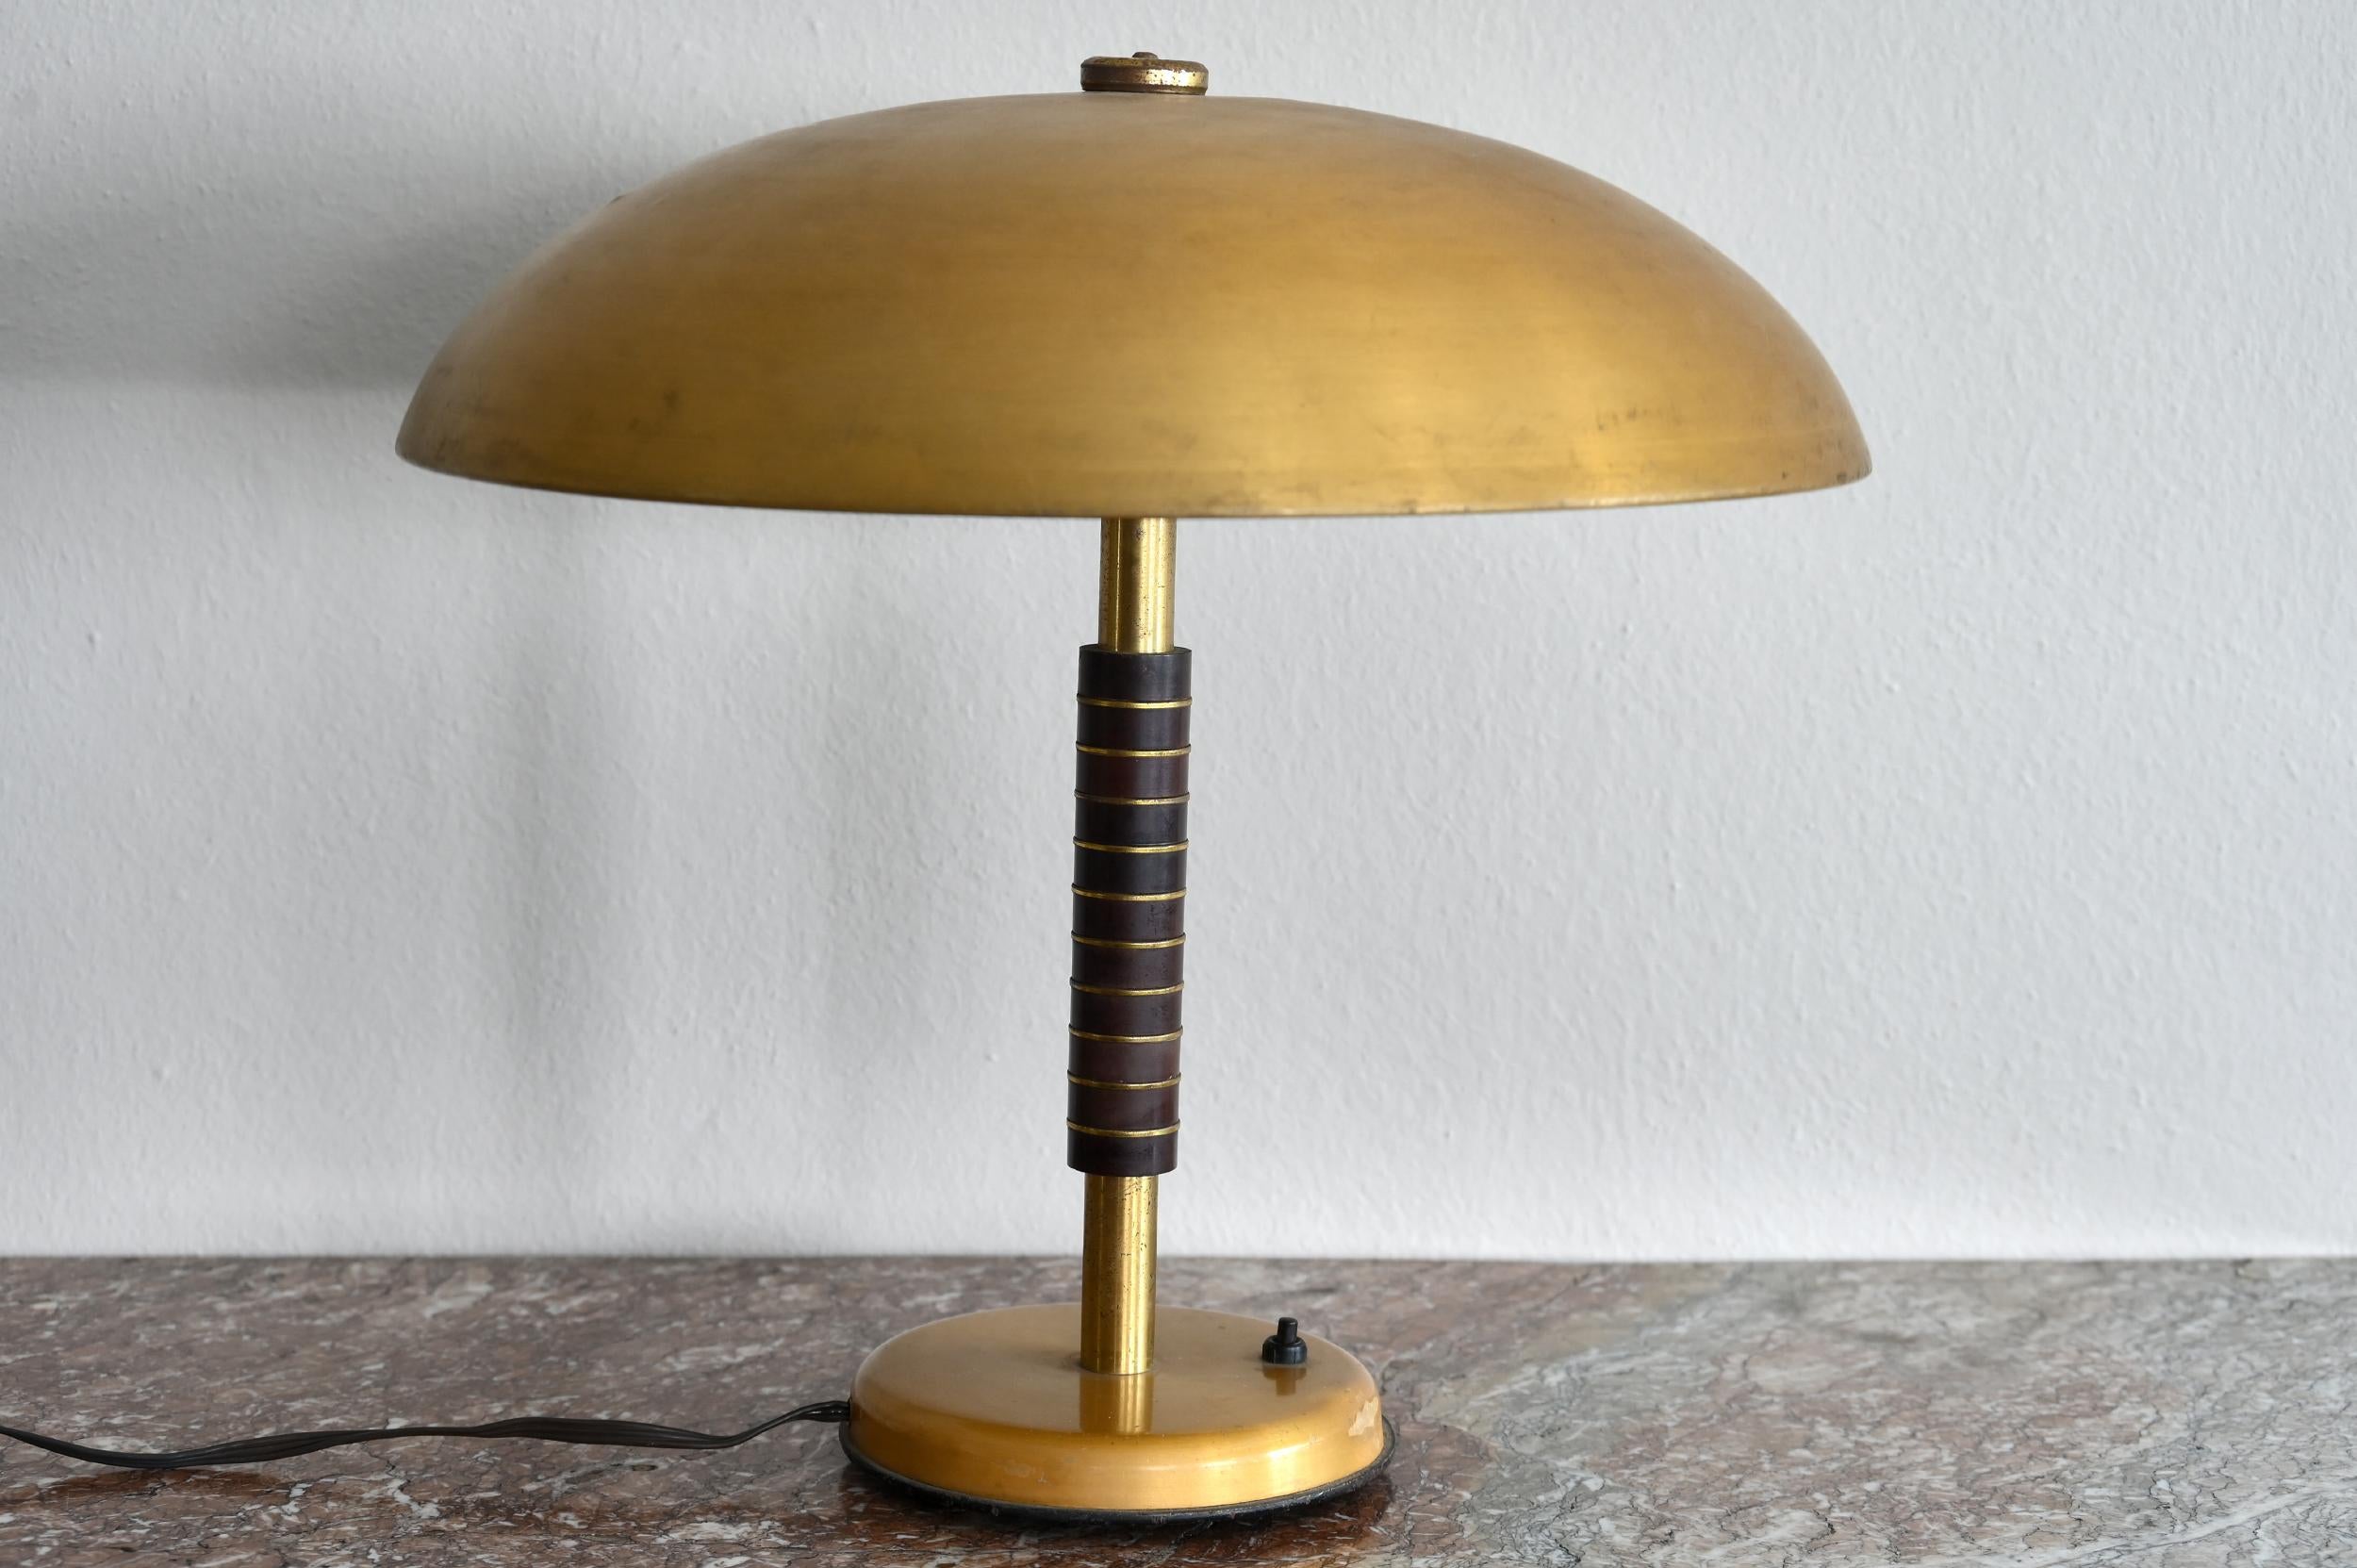 Table Lamp Probably Saxony Metallwarenfabrik, around 1930 in its original condition, with original cable and push button, a small denting on the base. Impresses by the special metallic color with the stripped copper rings on the base.